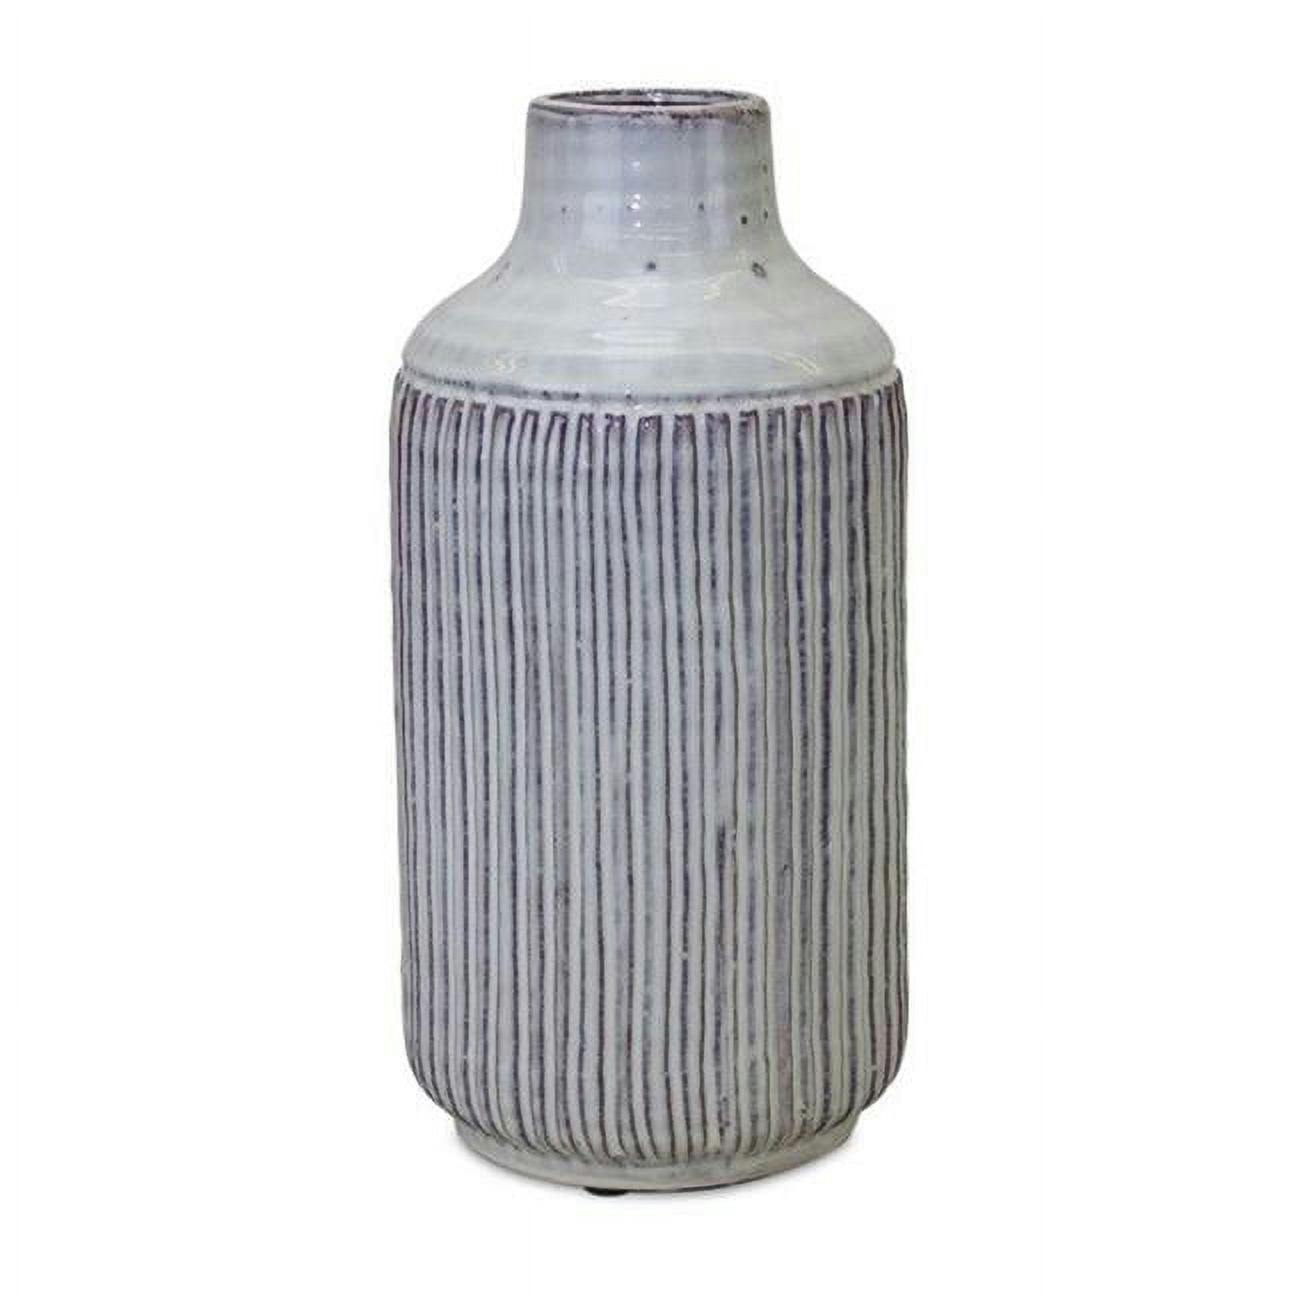 Rustic Glazed Ceramic Vase with Ribbed Texture - Brown and White